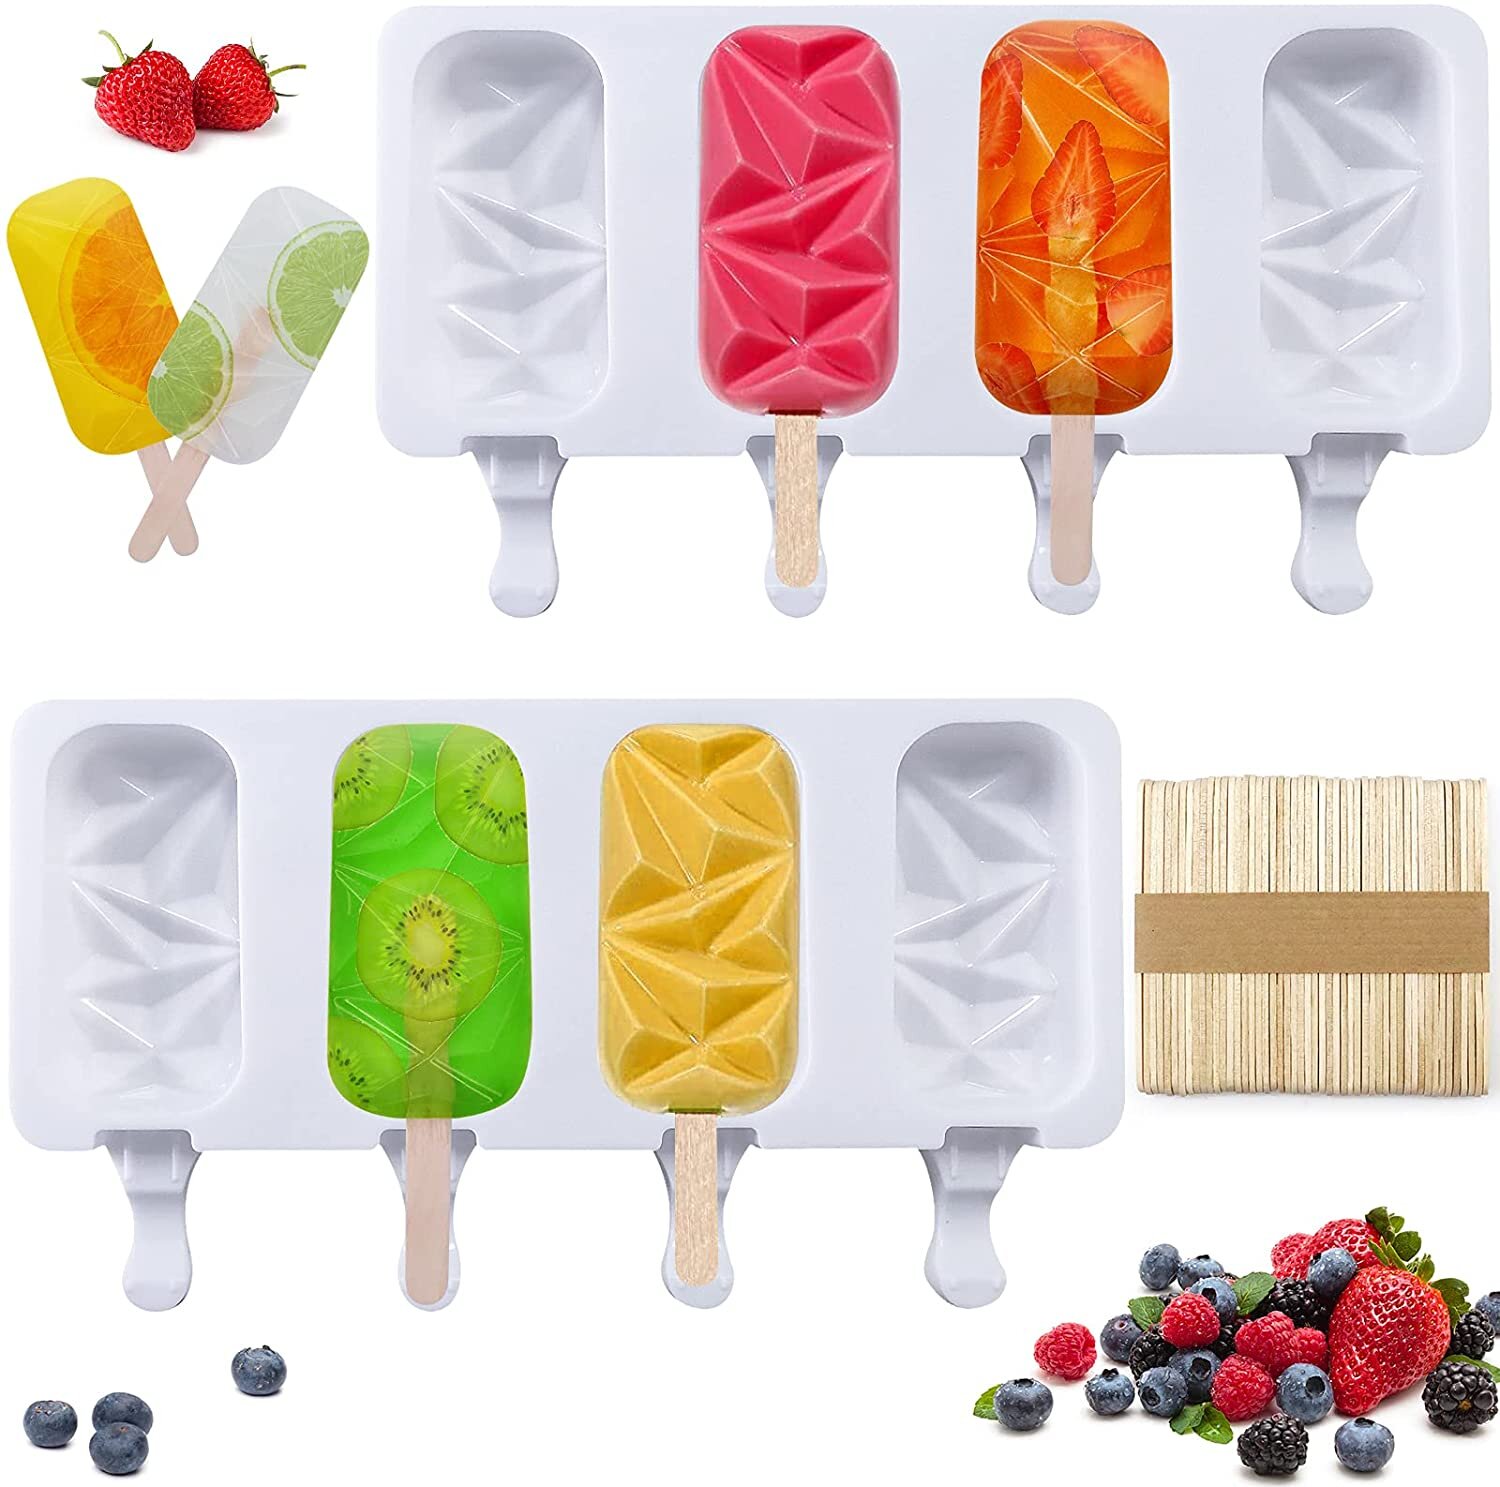 Homemade Popsicle Silicone Mold with 50 Wood Sticks Ice Cream Bar Ice Pop Molds 